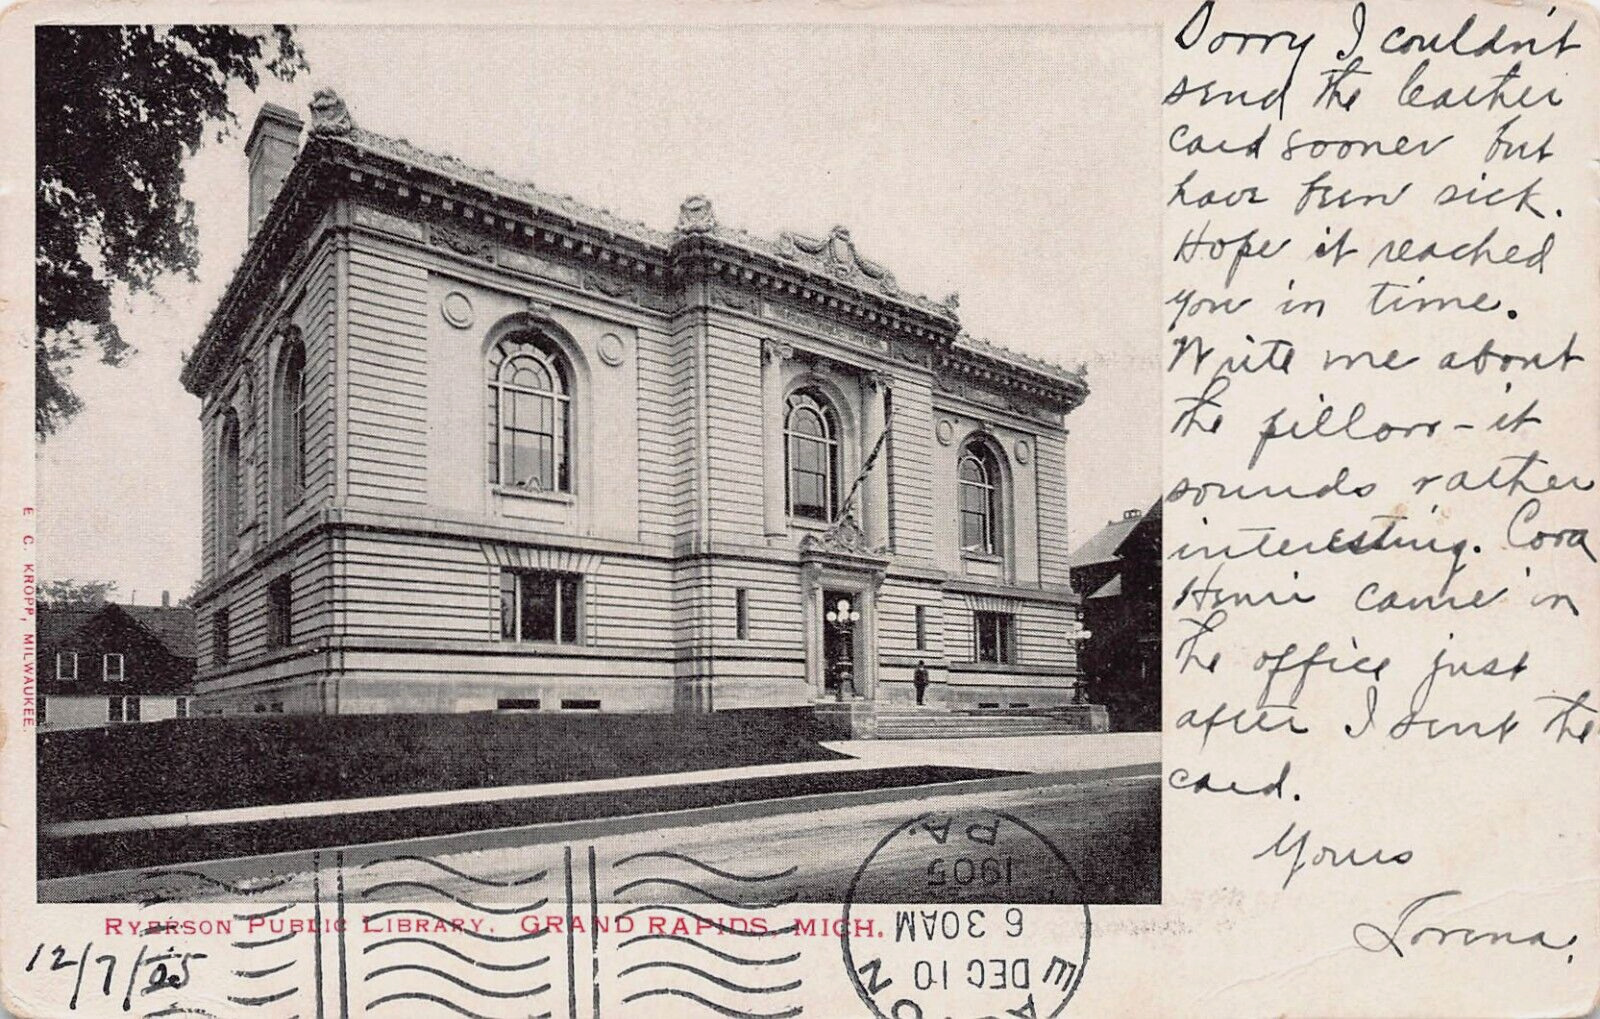 Ryerson Public Library, Grand Rapids, Michigan, Early Postcard, Used in 1905